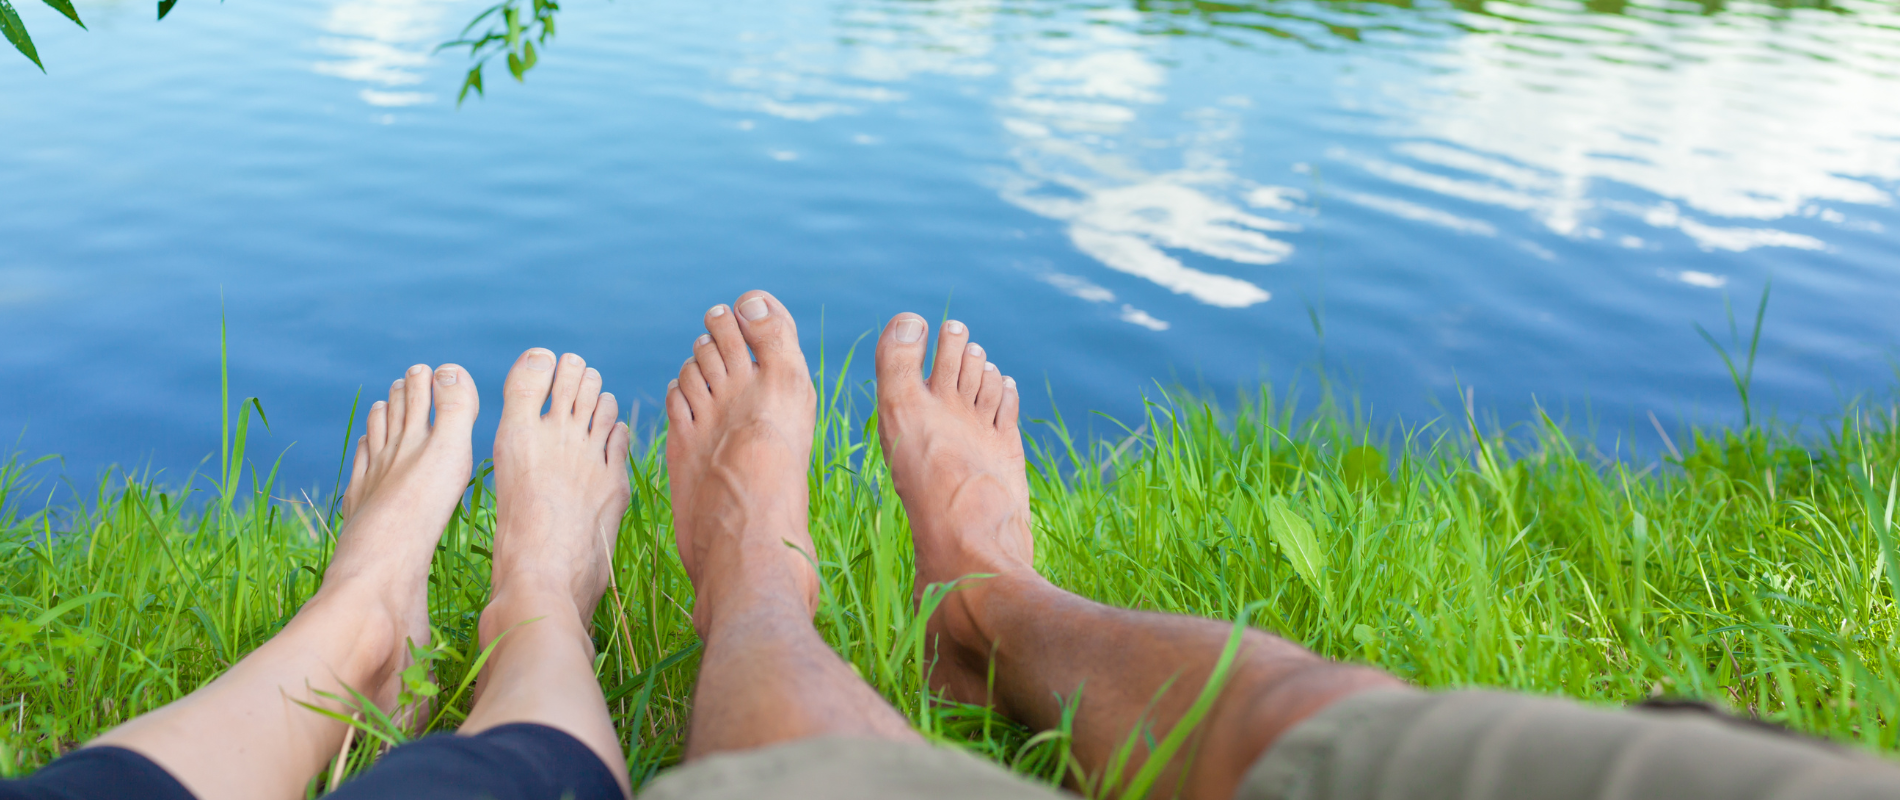 Two pairs of feet by water